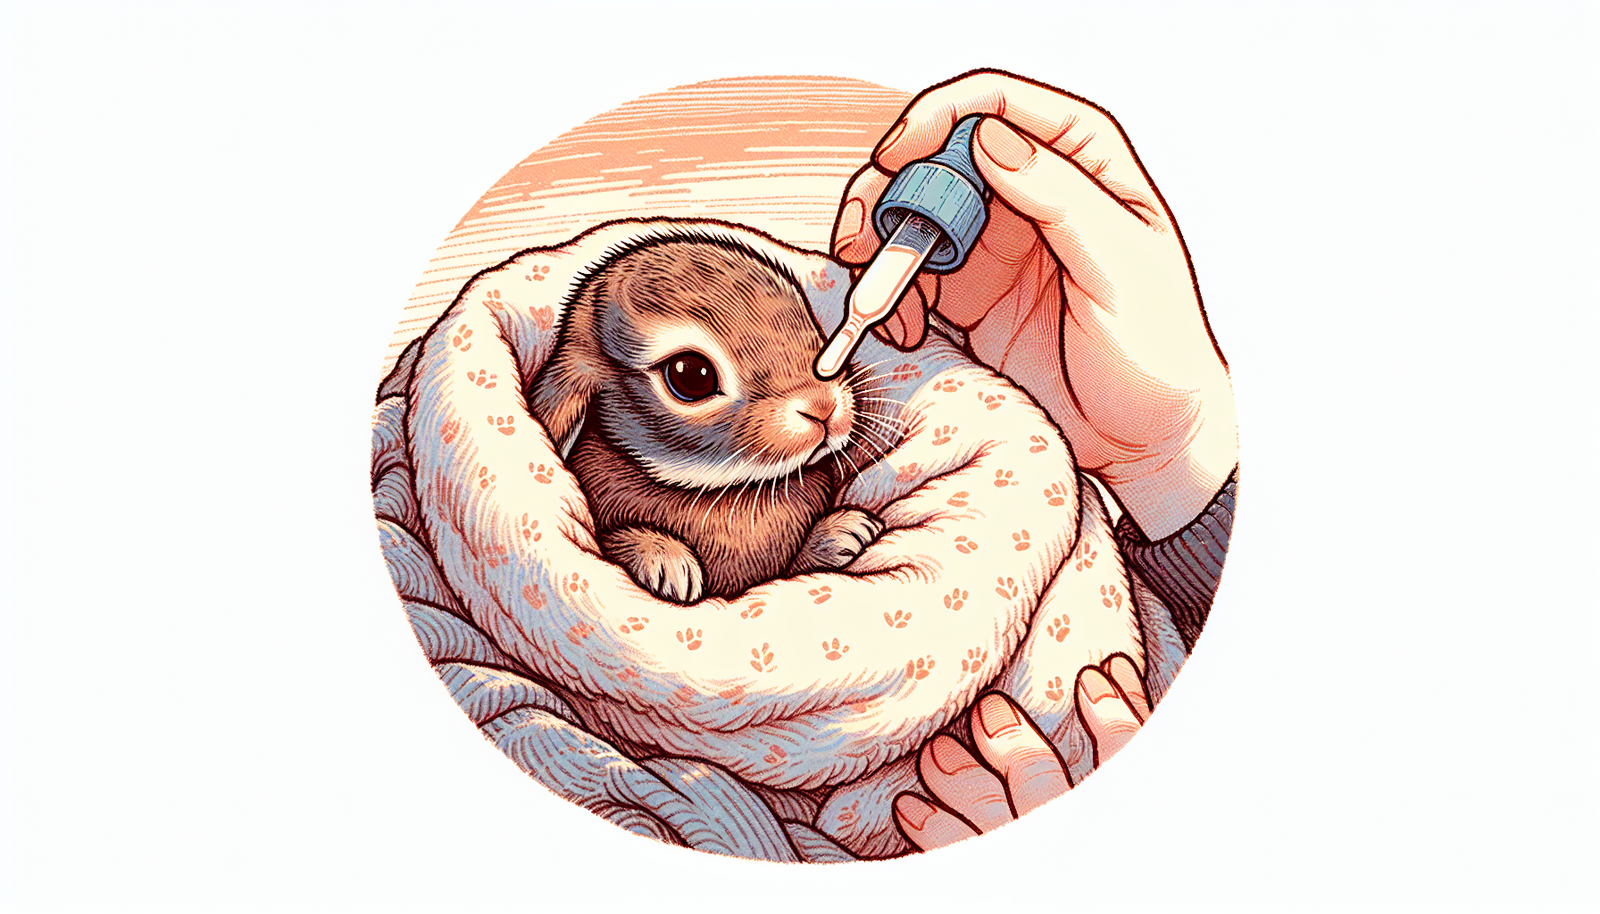 Illustration of an orphaned baby rabbit being cared for